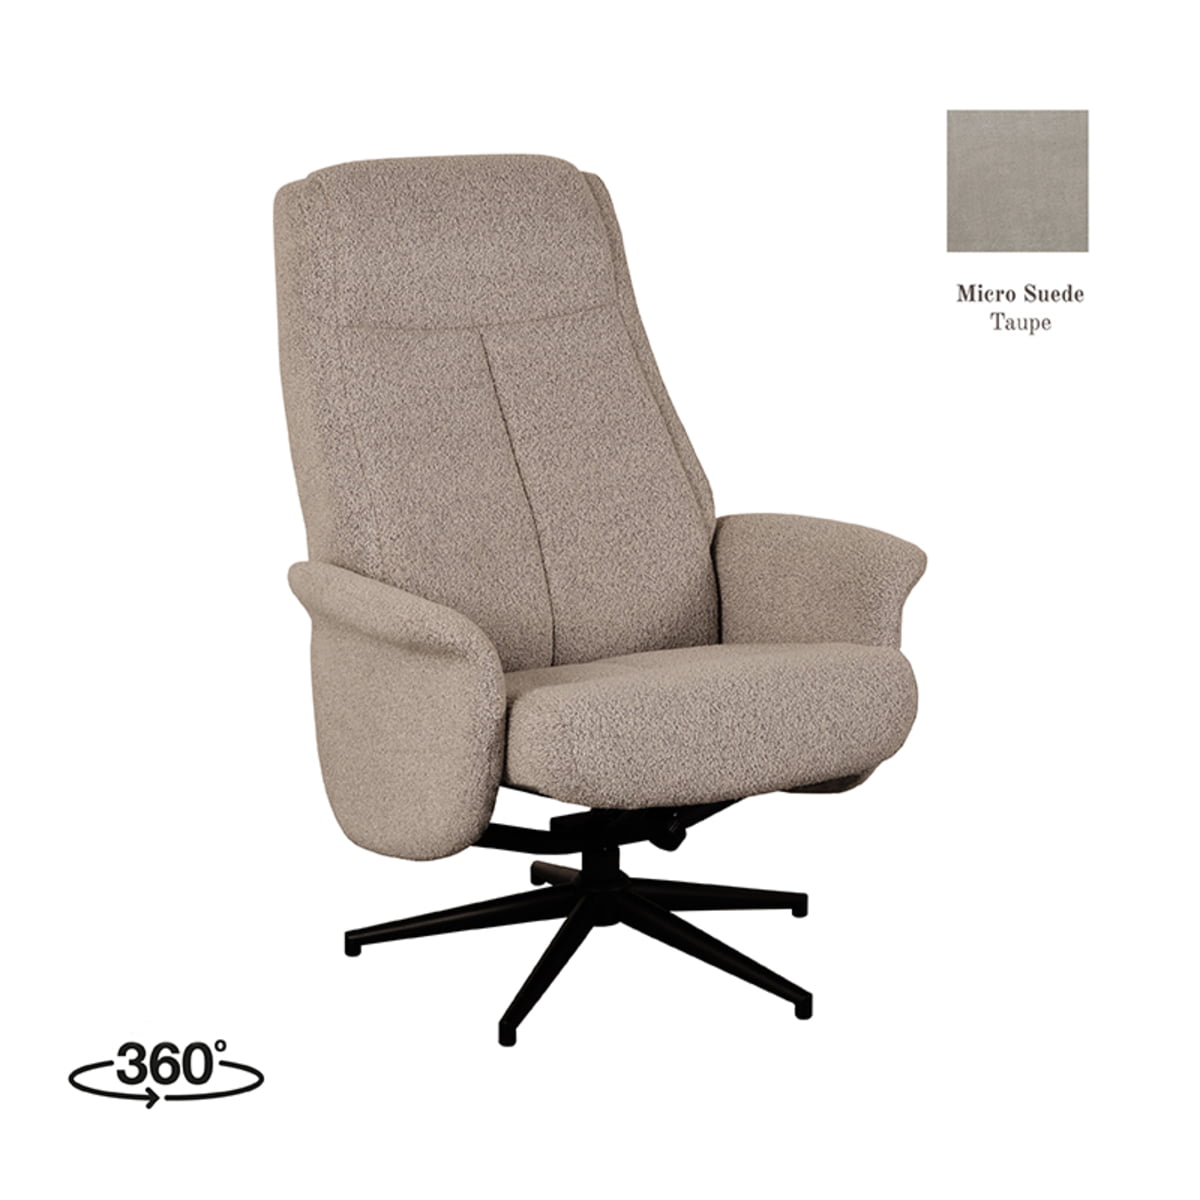 Fauteuil Bergen Micro Suede Taupe